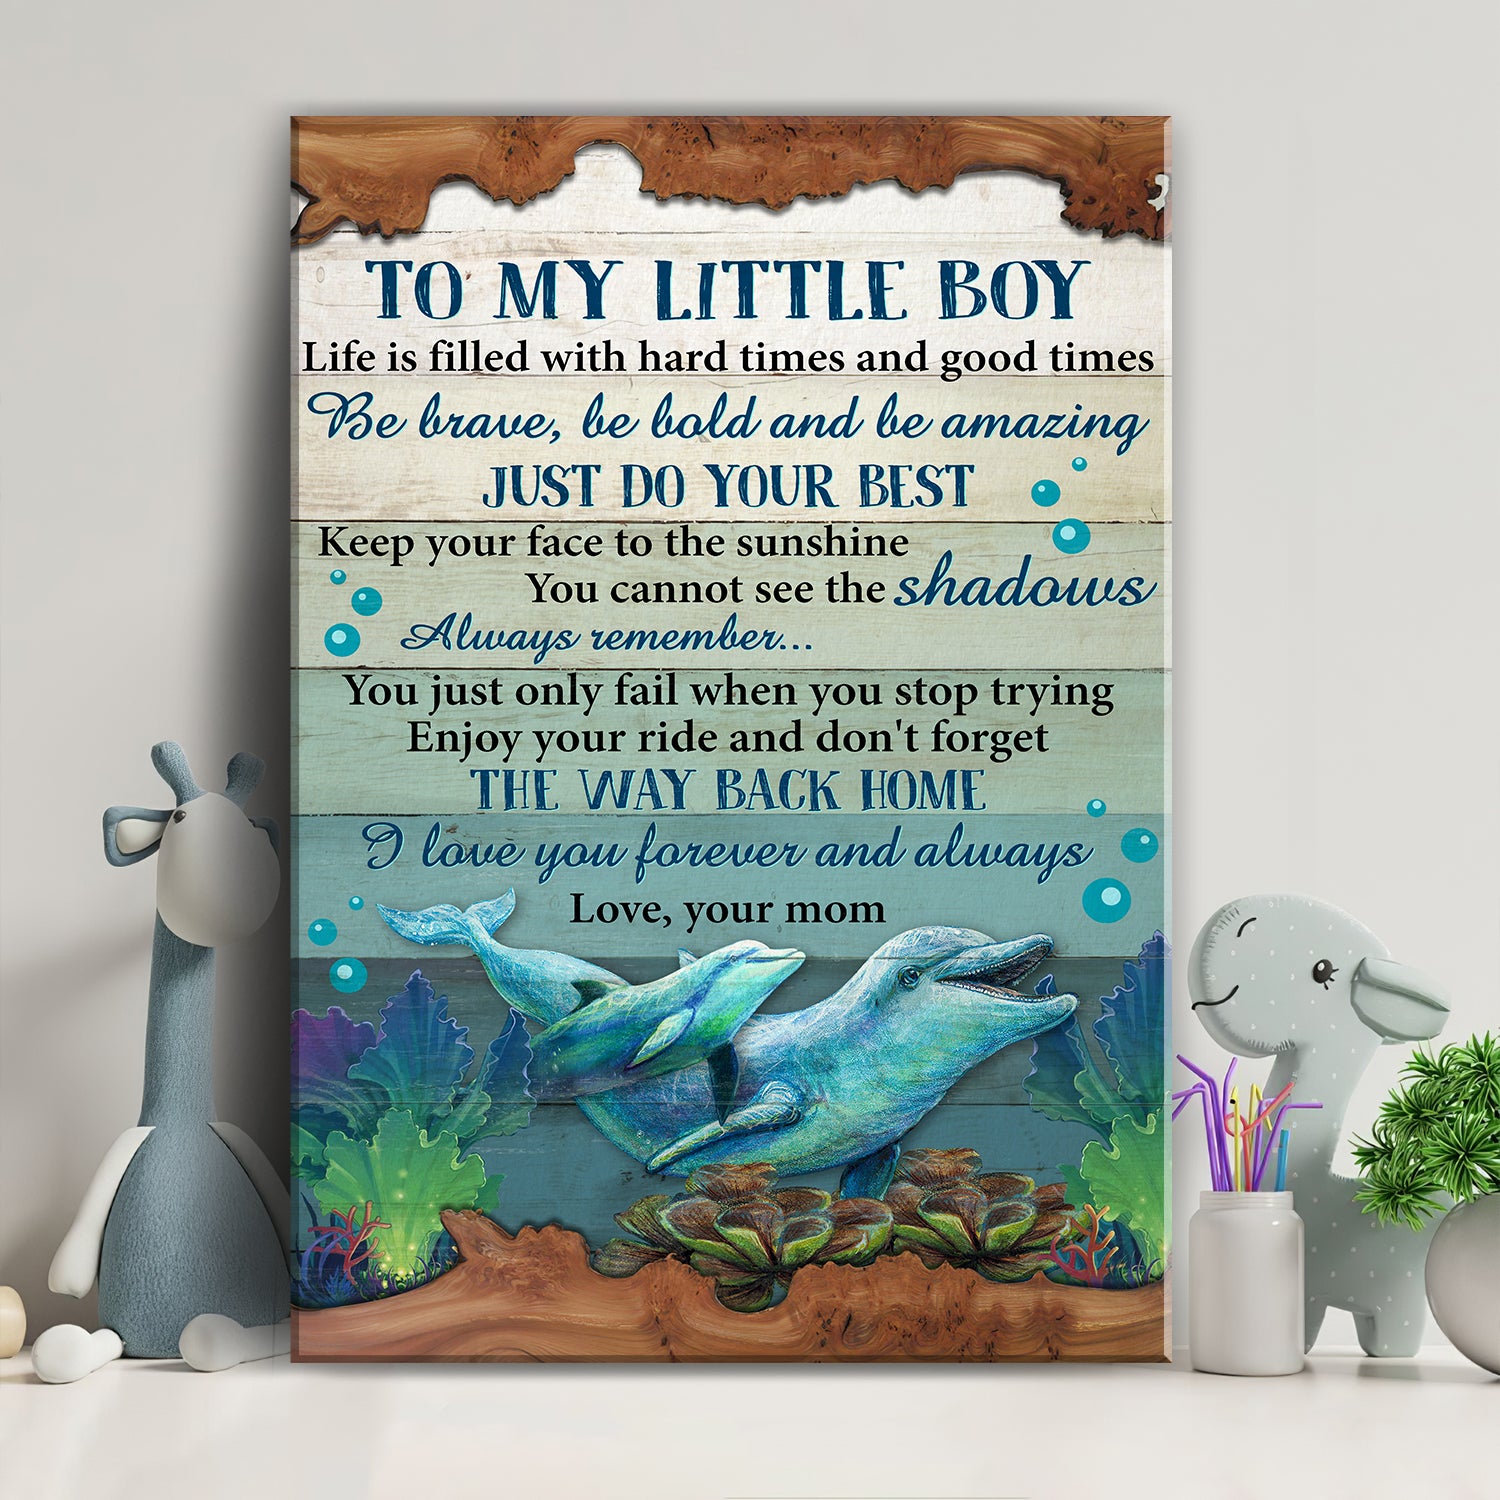 Mom to son, Dolphin family, Just do your best - Family Portrait Canvas Prints, Wall Art